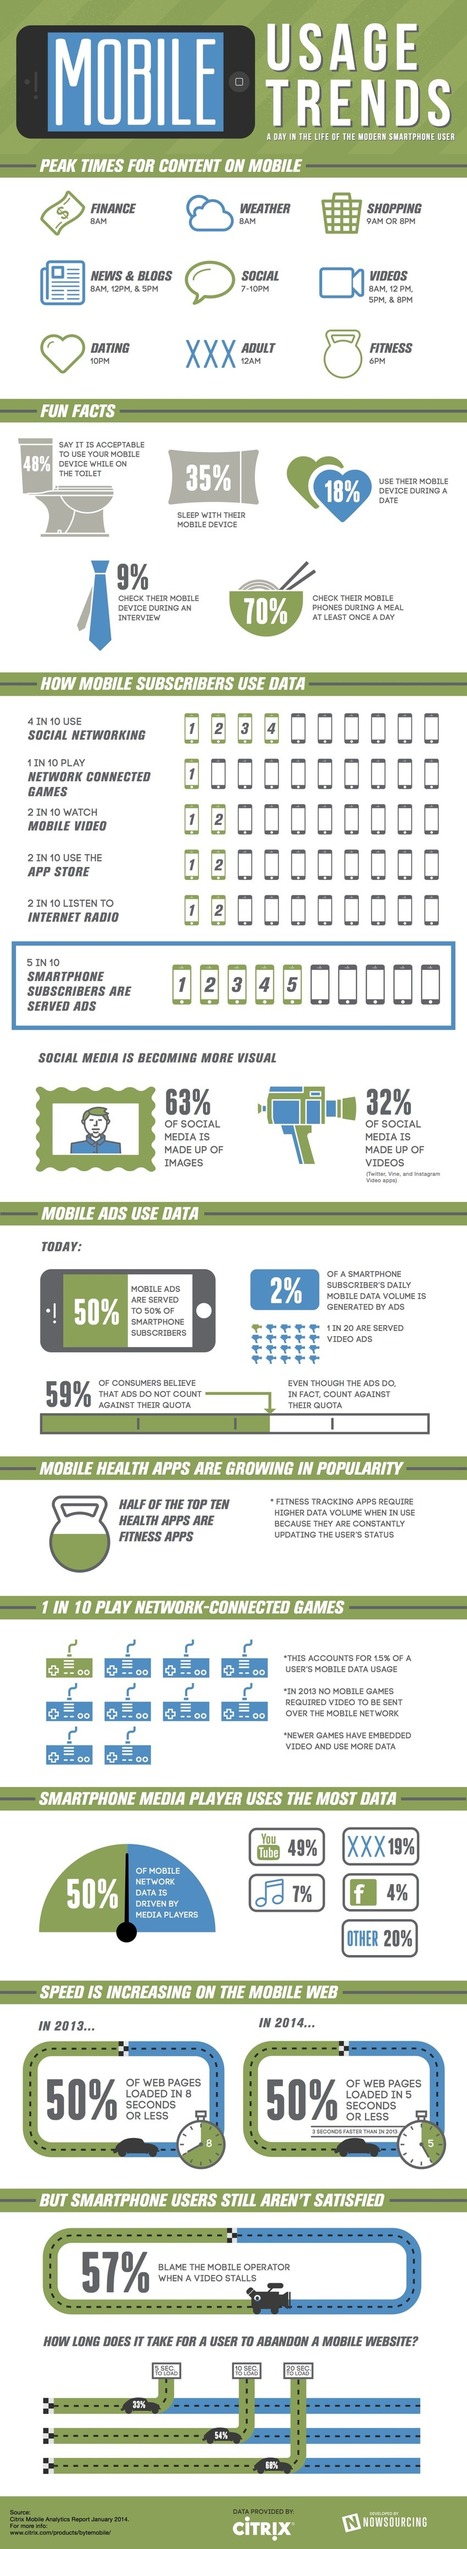 A Day in the Life of the Modern Smartphone User [Infographic] | Tidbits, titbits or tipbits? | Scoop.it